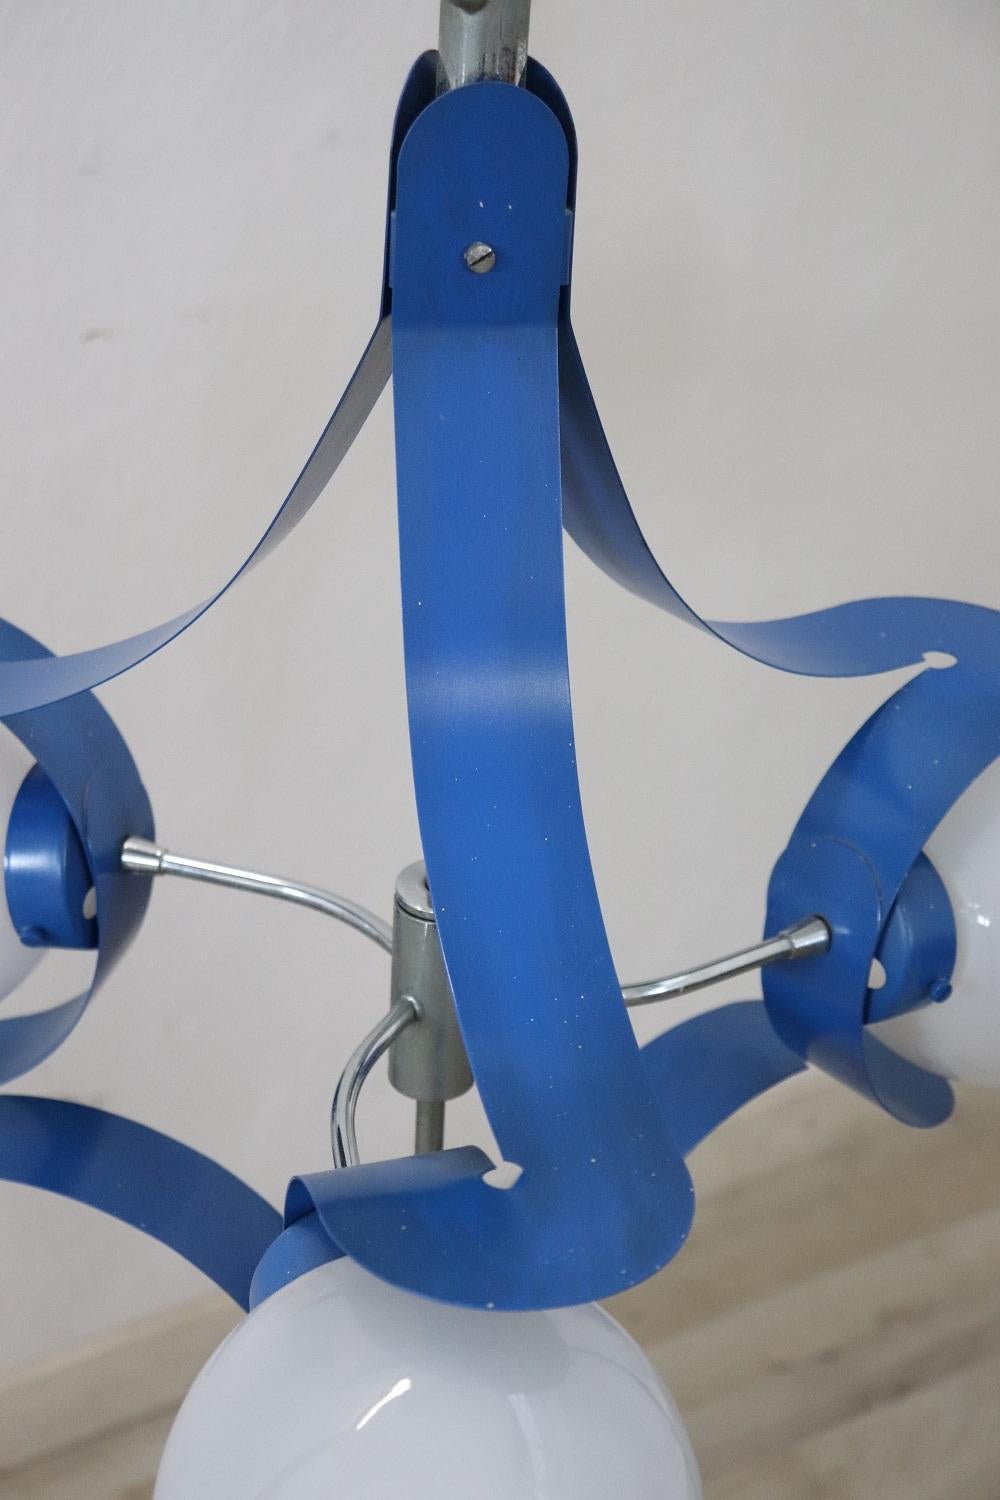 Mid-20th Century Italian Design Glass and Blue Lacquered Metal Stilnovo Style Chandelier, 1950s For Sale